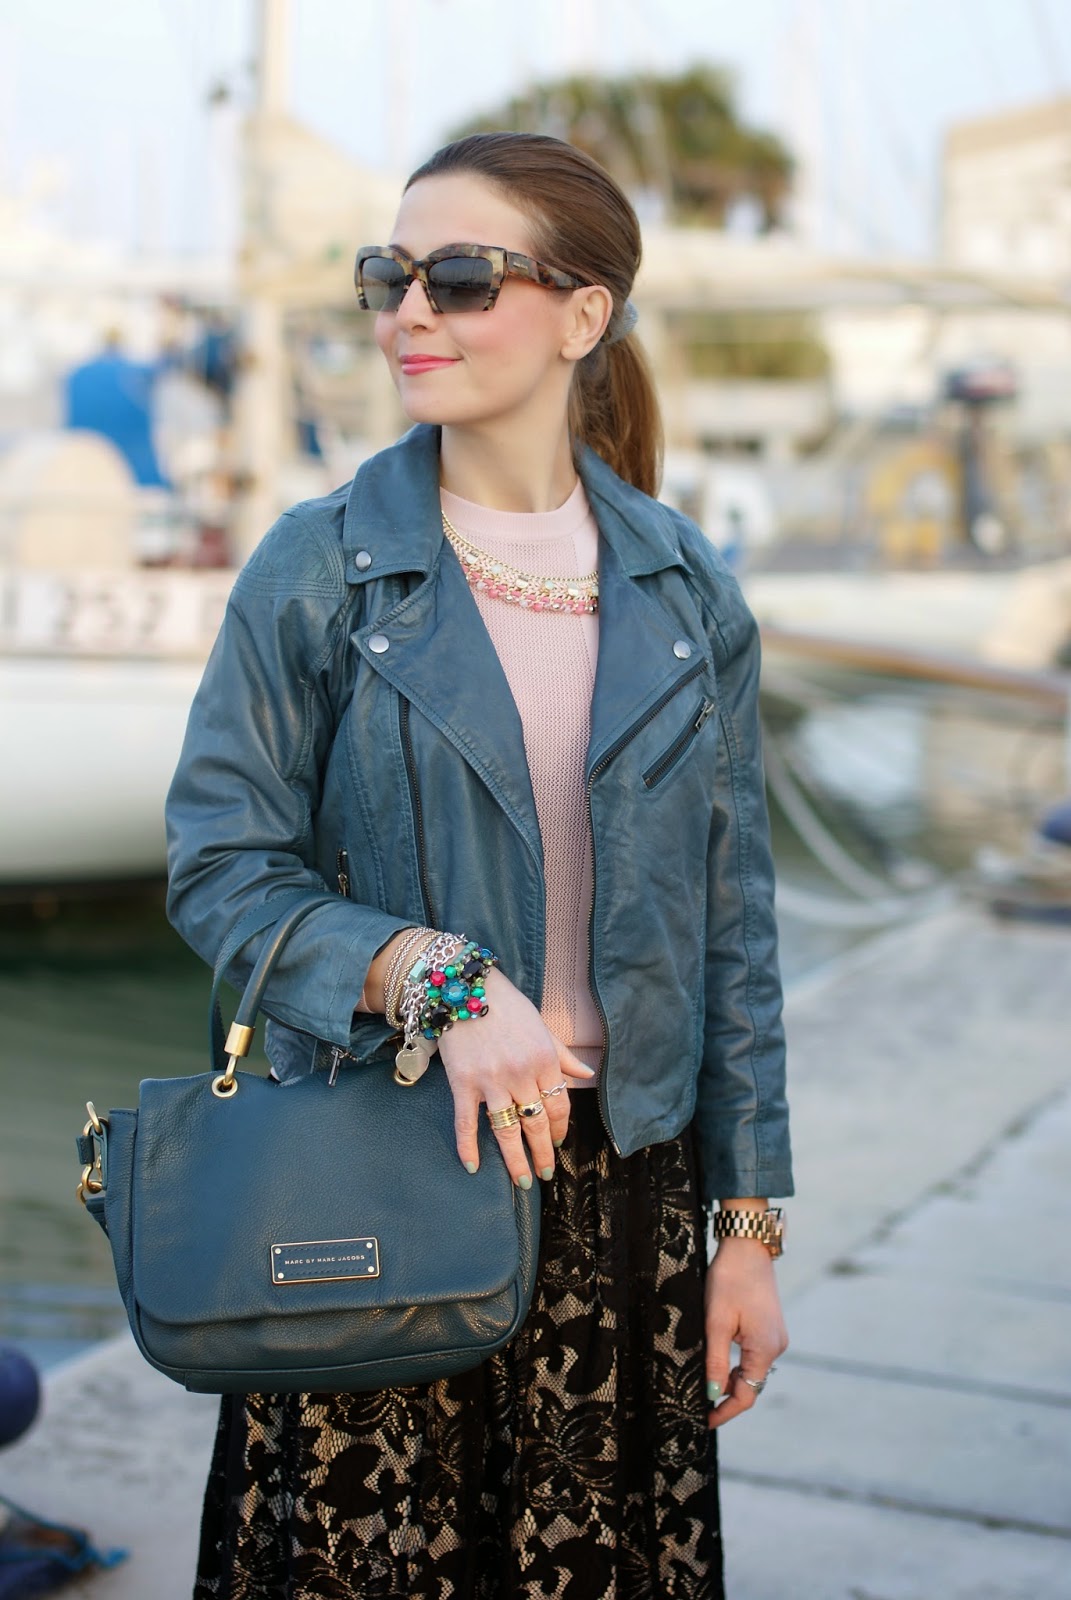 Opposites attract: lace skirt, leather jacket | Fashion and Cookies ...